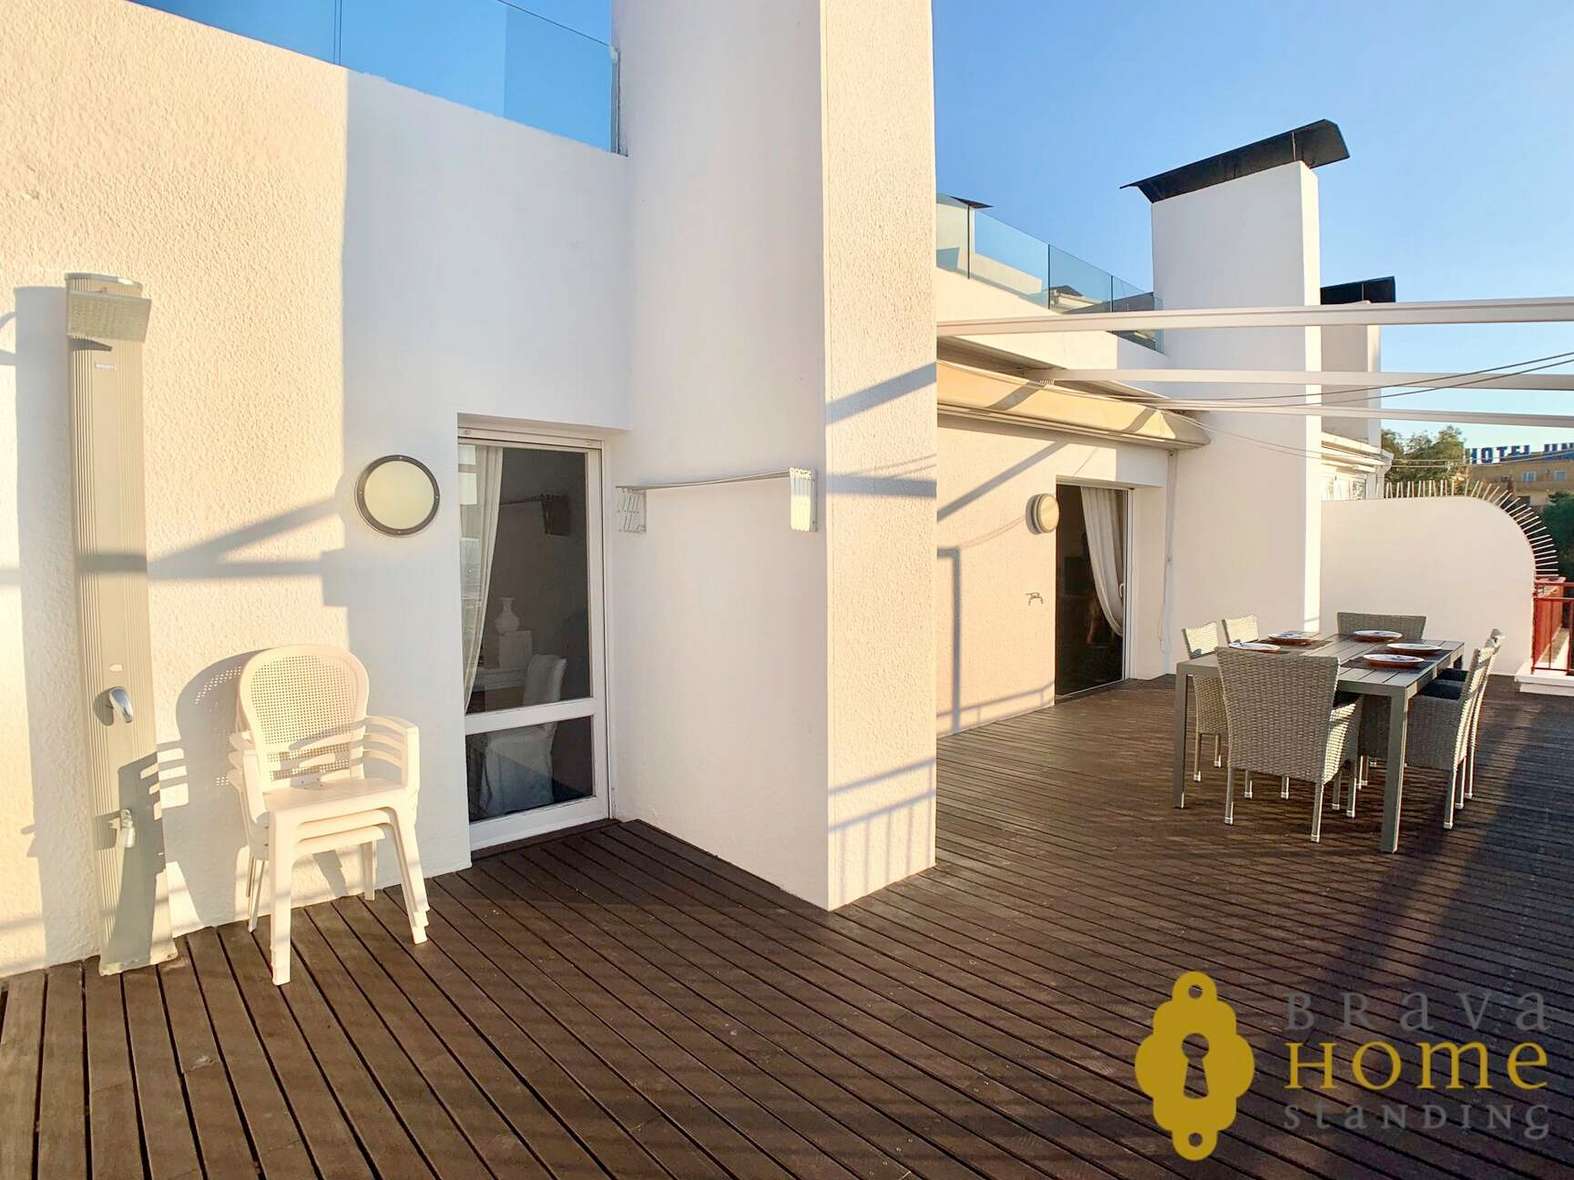 FOR SALE Superb Apartment in the Center of Rosas 50m from the beach